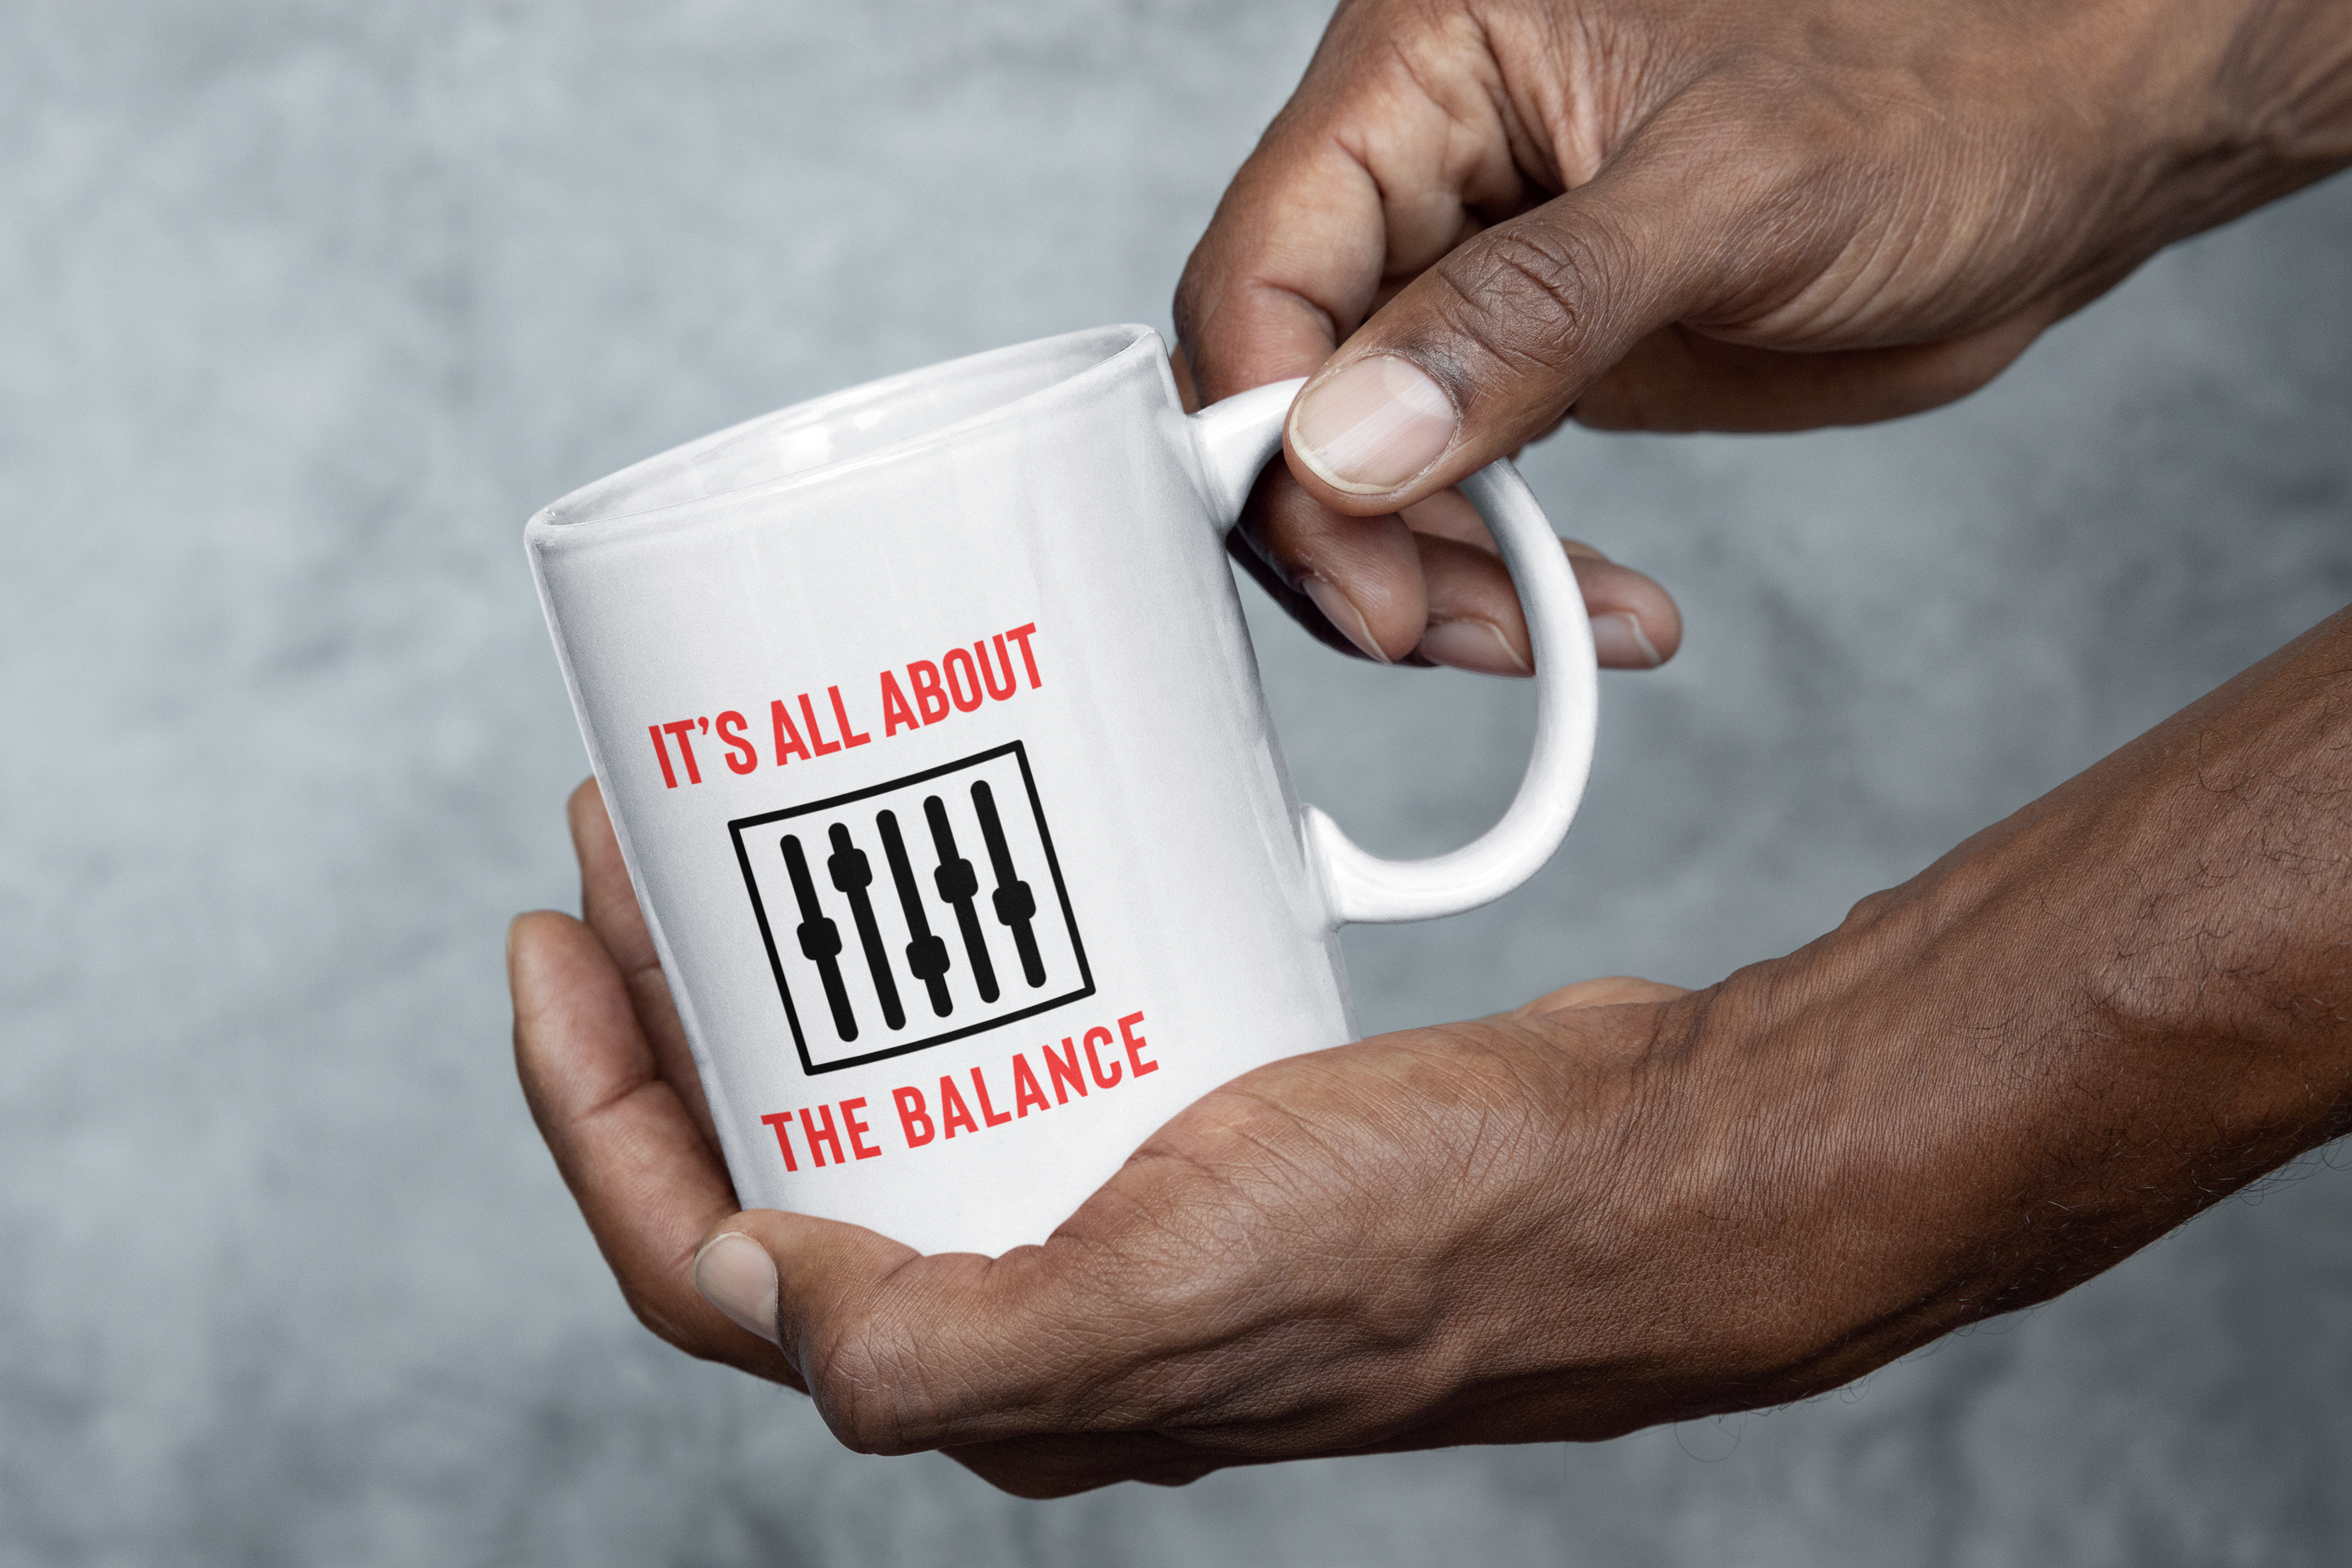 A hand holding a white mug with the phrase "IT'S ALL ABOUT THE BALANCE" and a graphic of audio mixing sliders, symbolizing the meticulous craft of balancing sounds in music production.